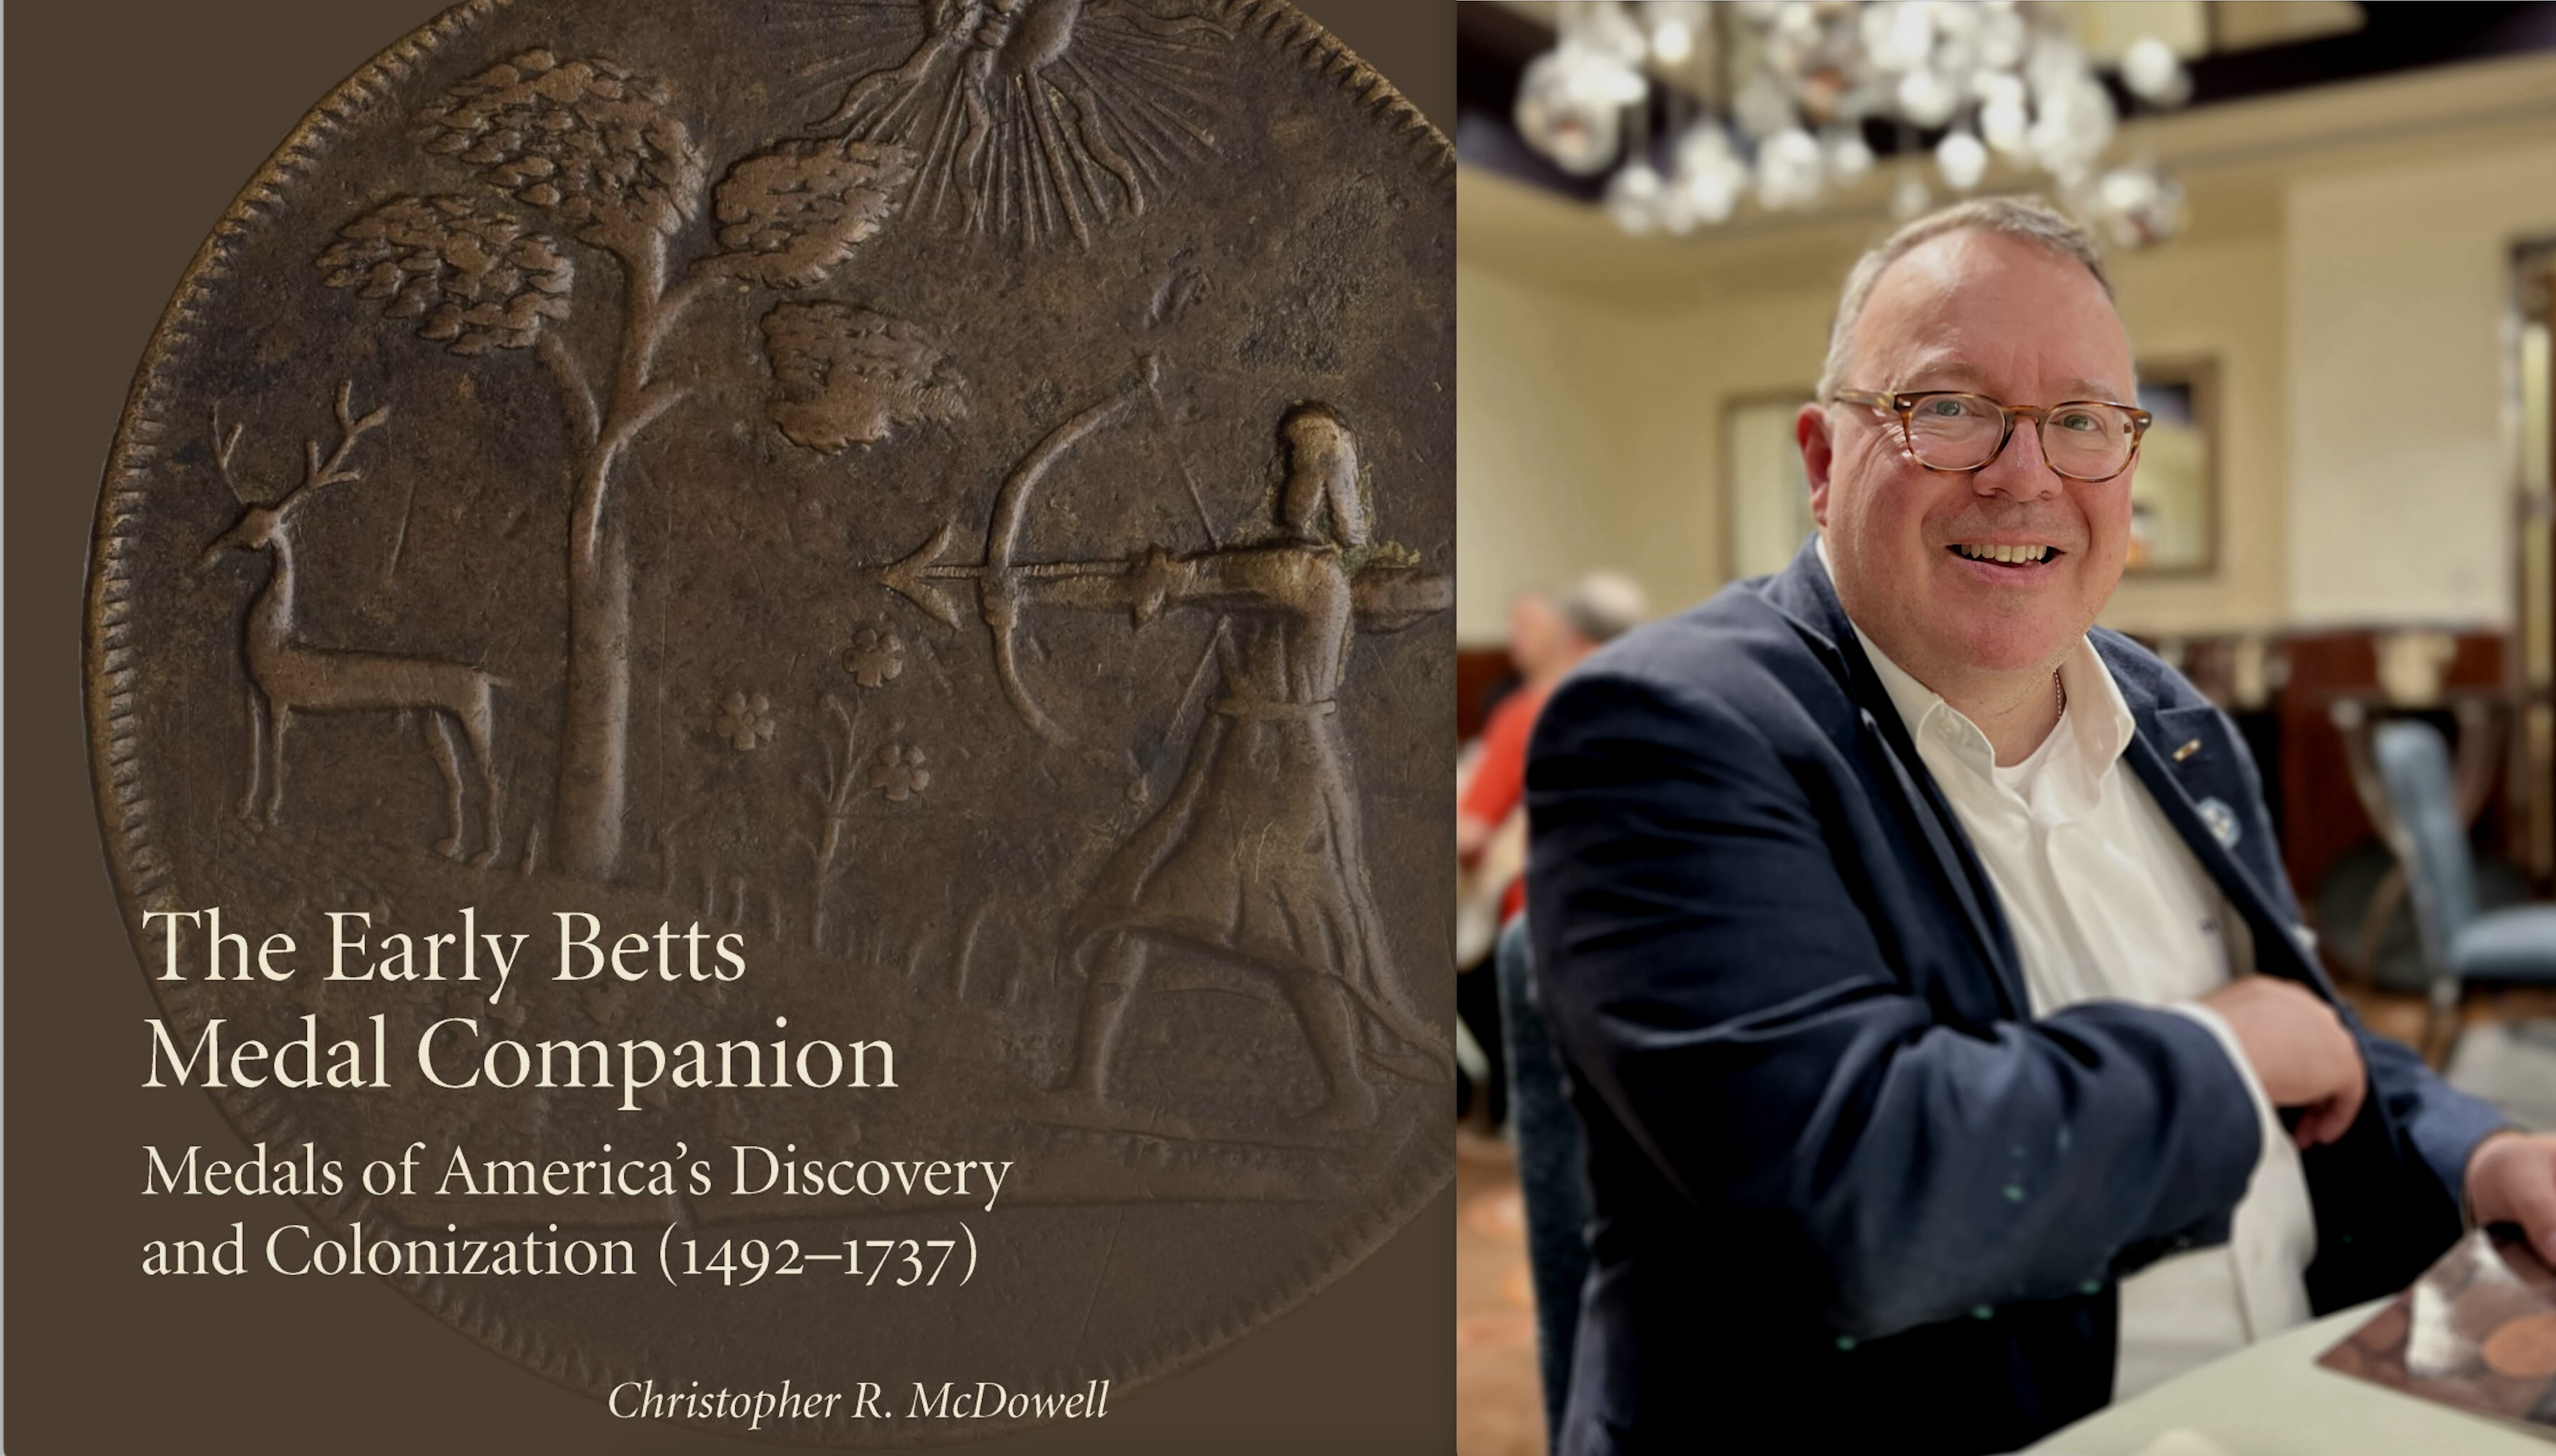 The Early Betts Medal Companion earns 3rd Prize at IAPN Competition